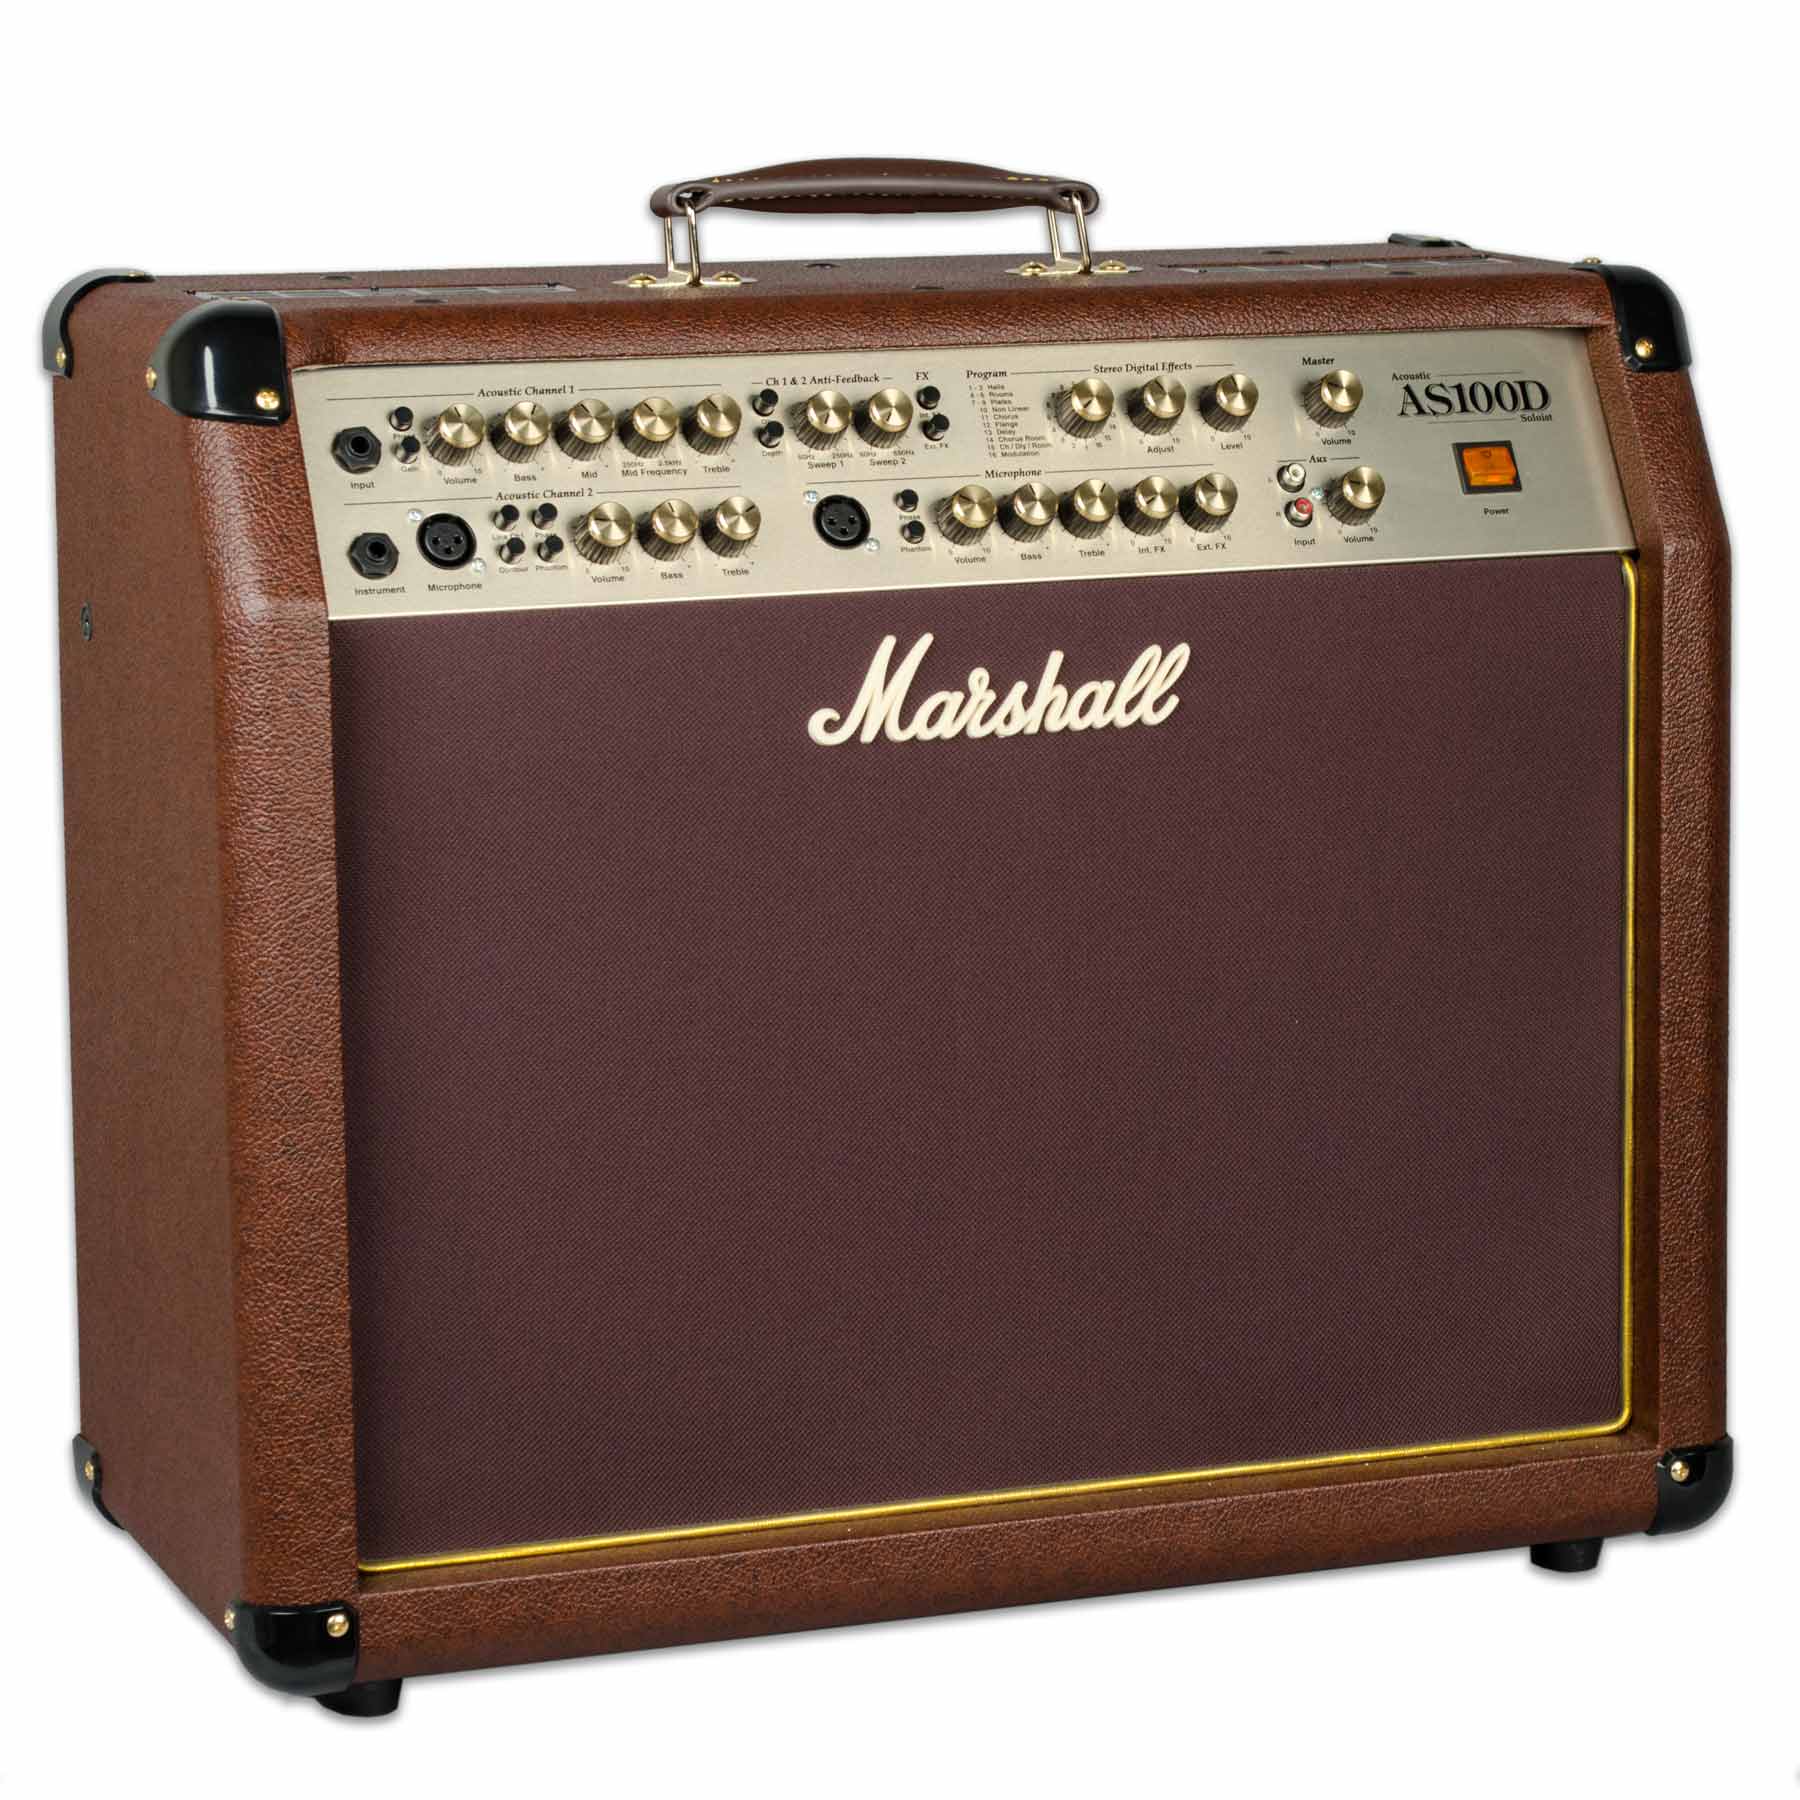 MARSHALL AS100D-C ACOUSTIC AMPLIFIER